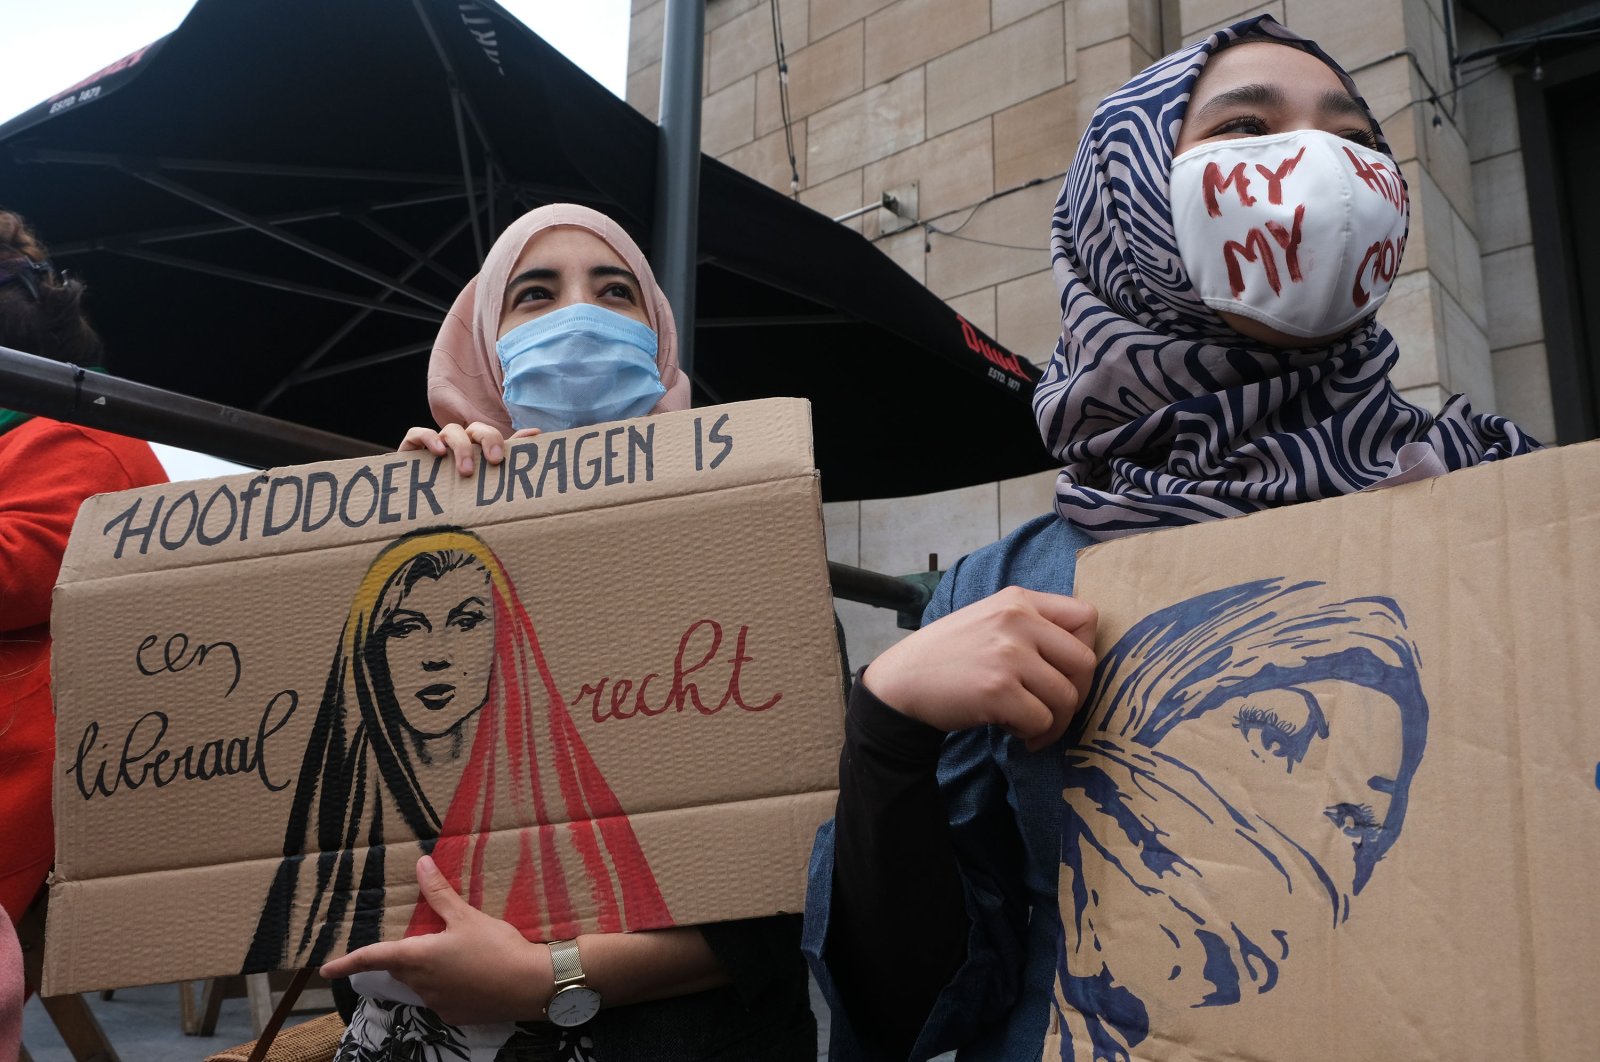 Protesters take part in a rally against Belgium&#039;s Constitutional Court rule to prohibit the use of headscarves in universities, Brussels, Belgium, July 5, 2020. (Shutterstock Photo)